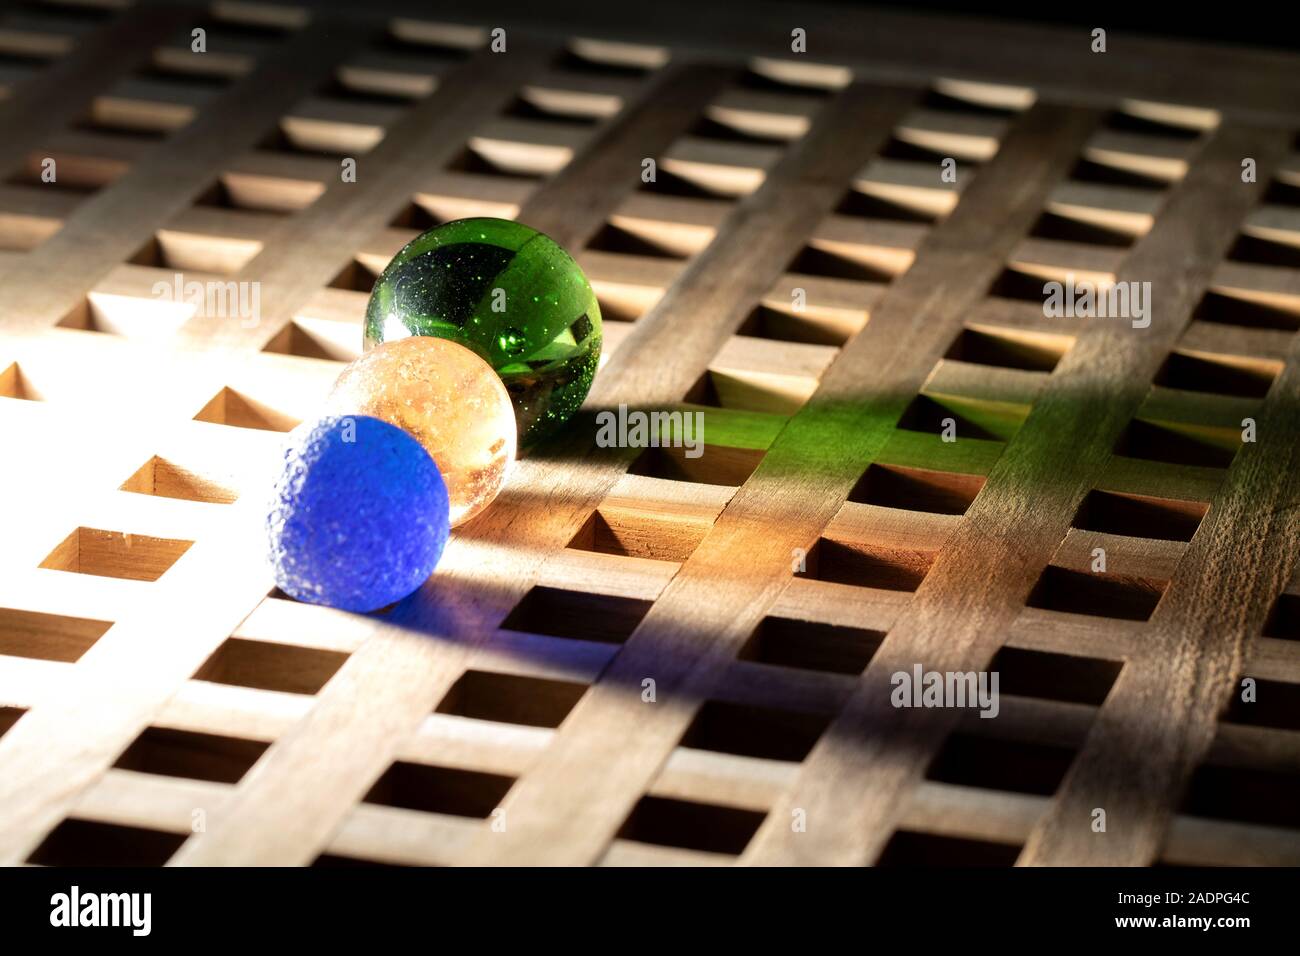 A portrait of three colorful marbles lit by a single light making them cast colorful shadows and reflections onto a wooden surface. Stock Photo